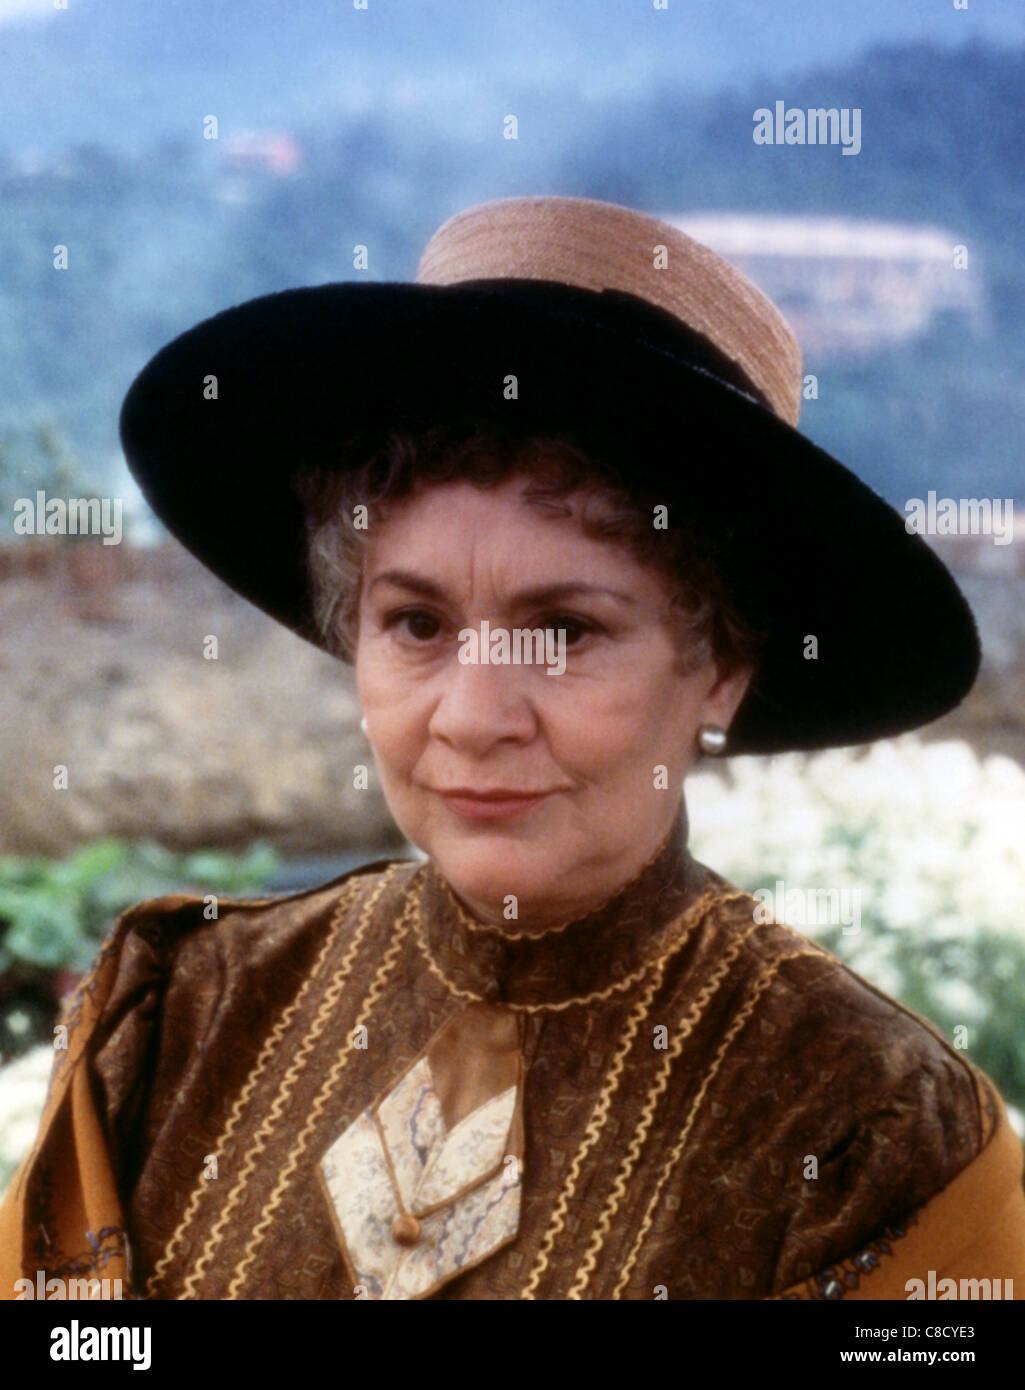 Joan Plowright High Resolution Stock Photography and Images - Alamy